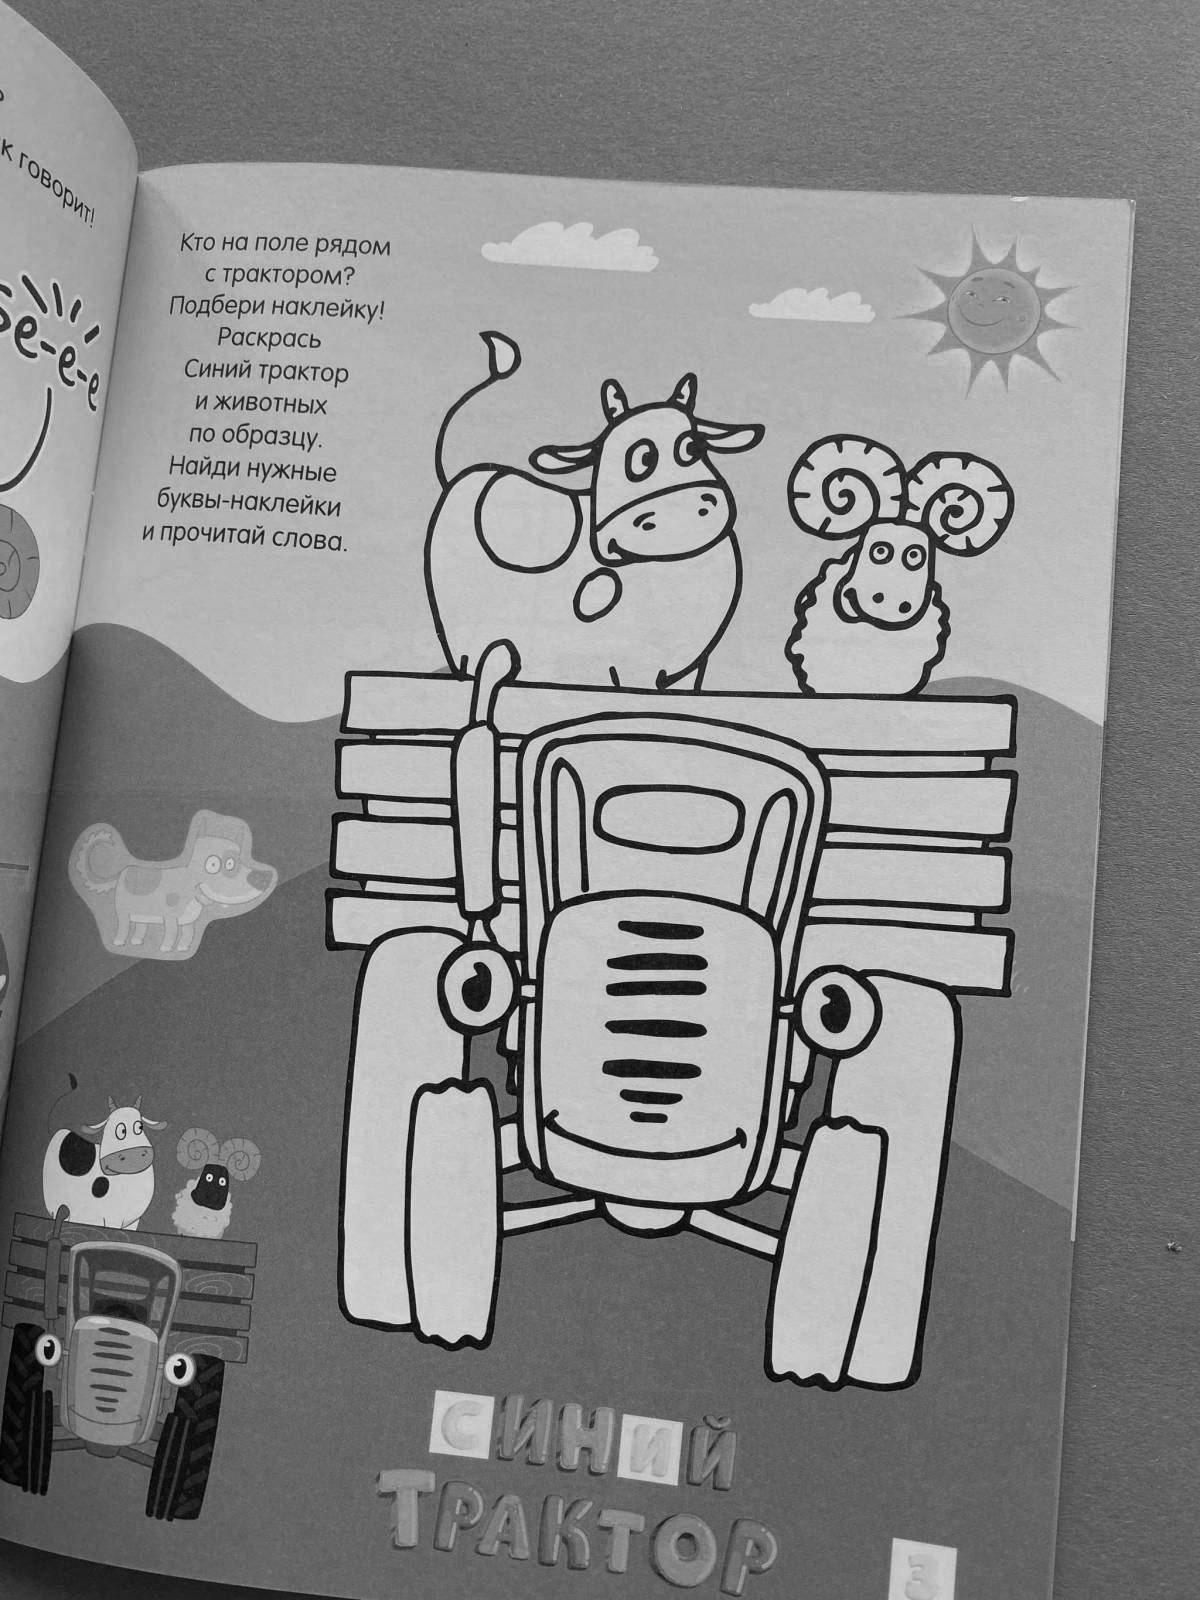 Funny cat and blue tractor coloring book